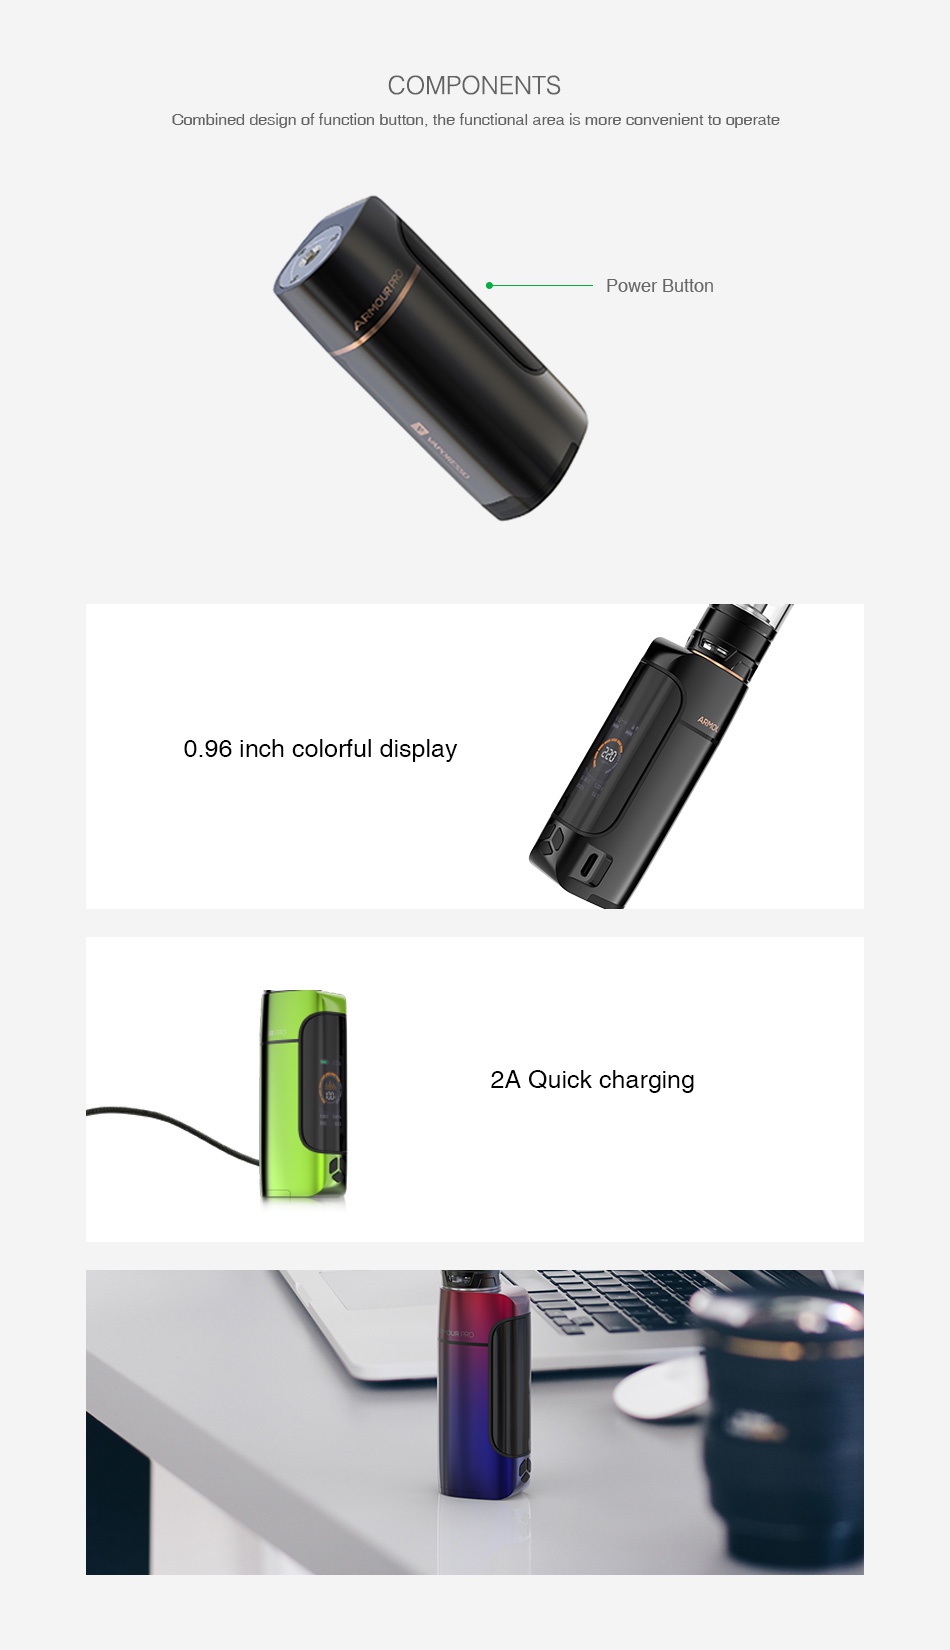 Vaporesso Armour Pro 100W TC Box MOD COMPONENTS Combined design of function button  the functional area is more convenient to operate Power Button 0  96 inch colorful display 2A Quick charging